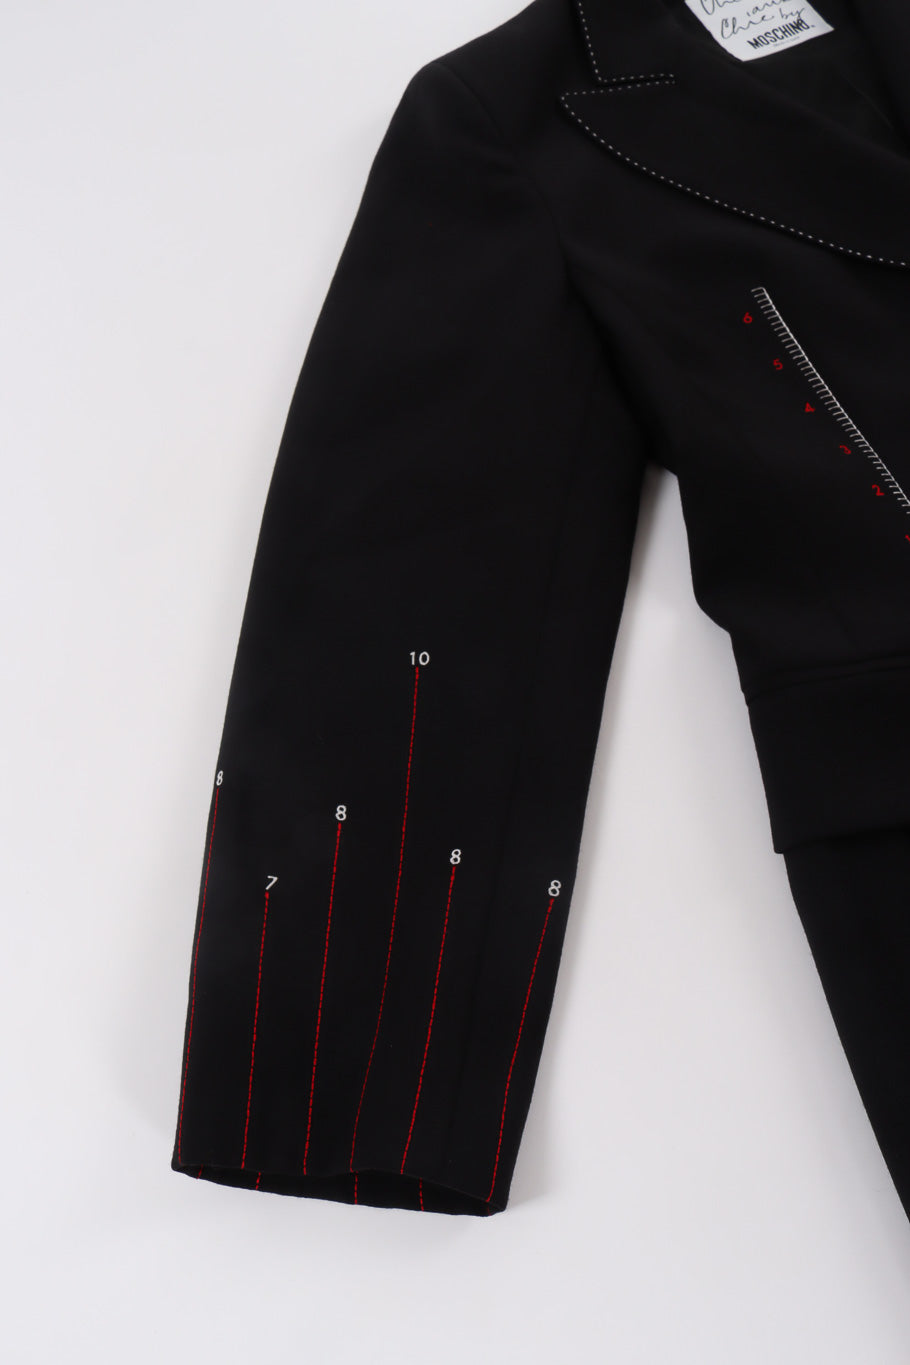 Embroidered graph blazer by Moschino sleeve detail @recessla